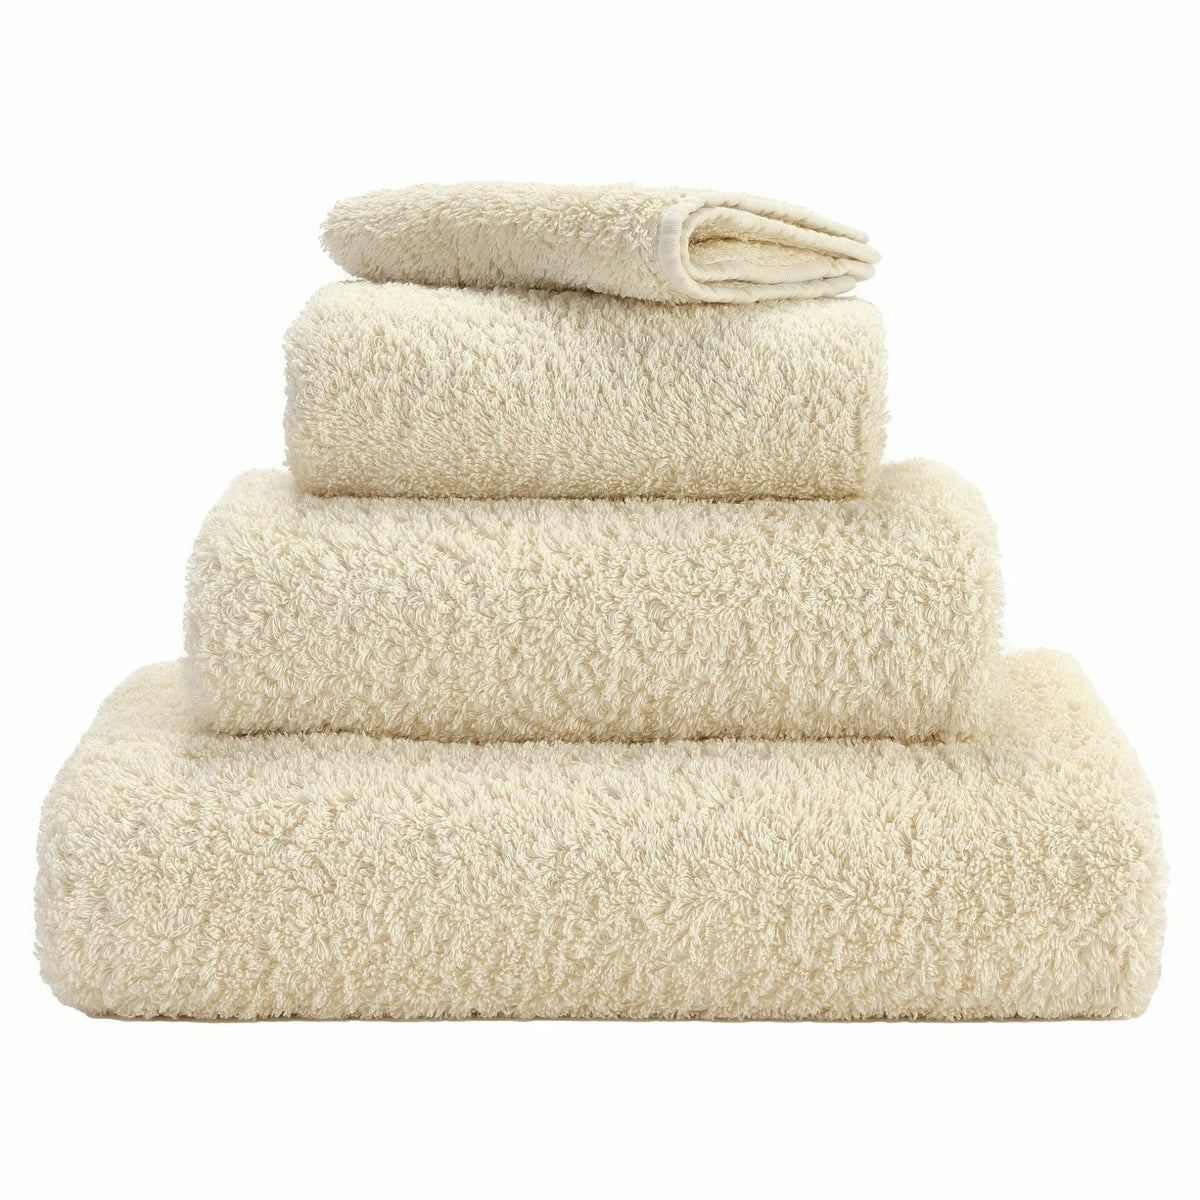 Superio Terry Towel White Cloths 100% Cotton 12 Cleaning Rags Facial Washcloths, Spa Cloths, Cleaning Cloths for Multi-Purposes (6)